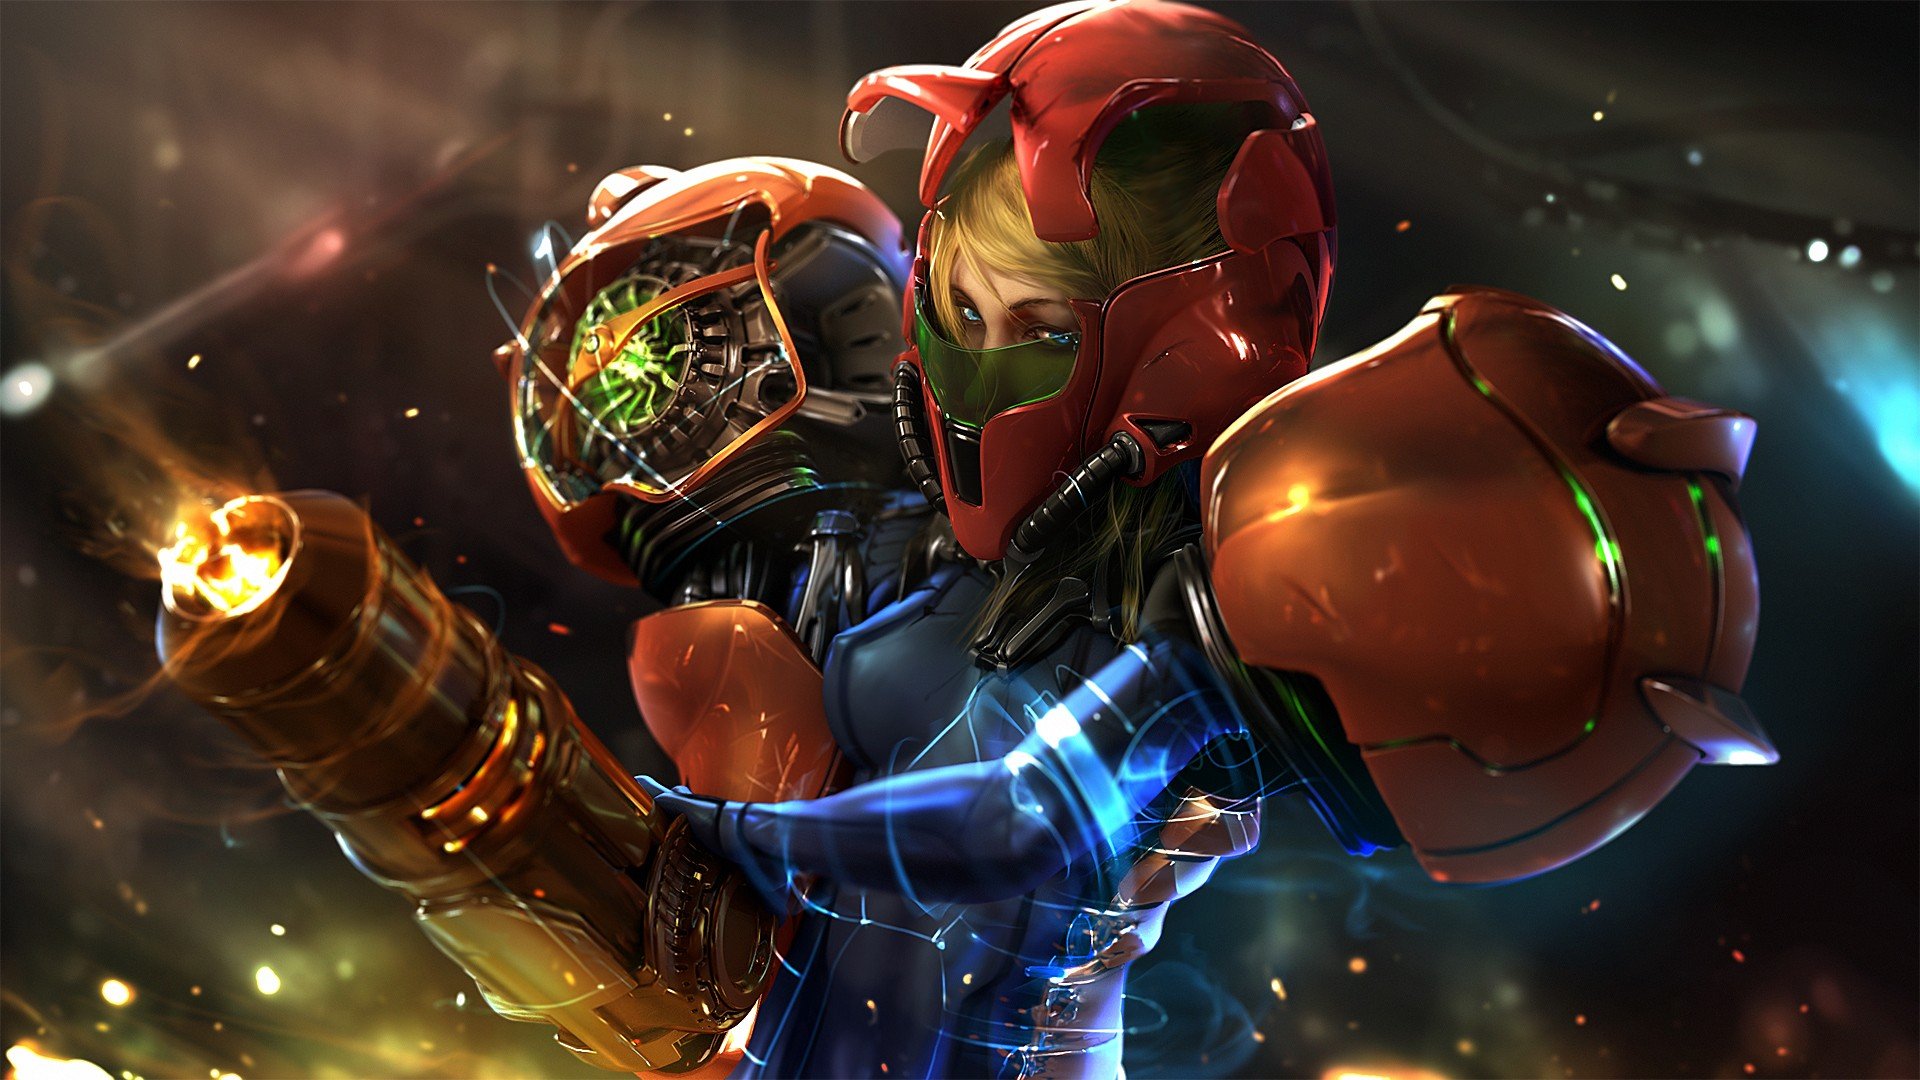 download samus other m for free